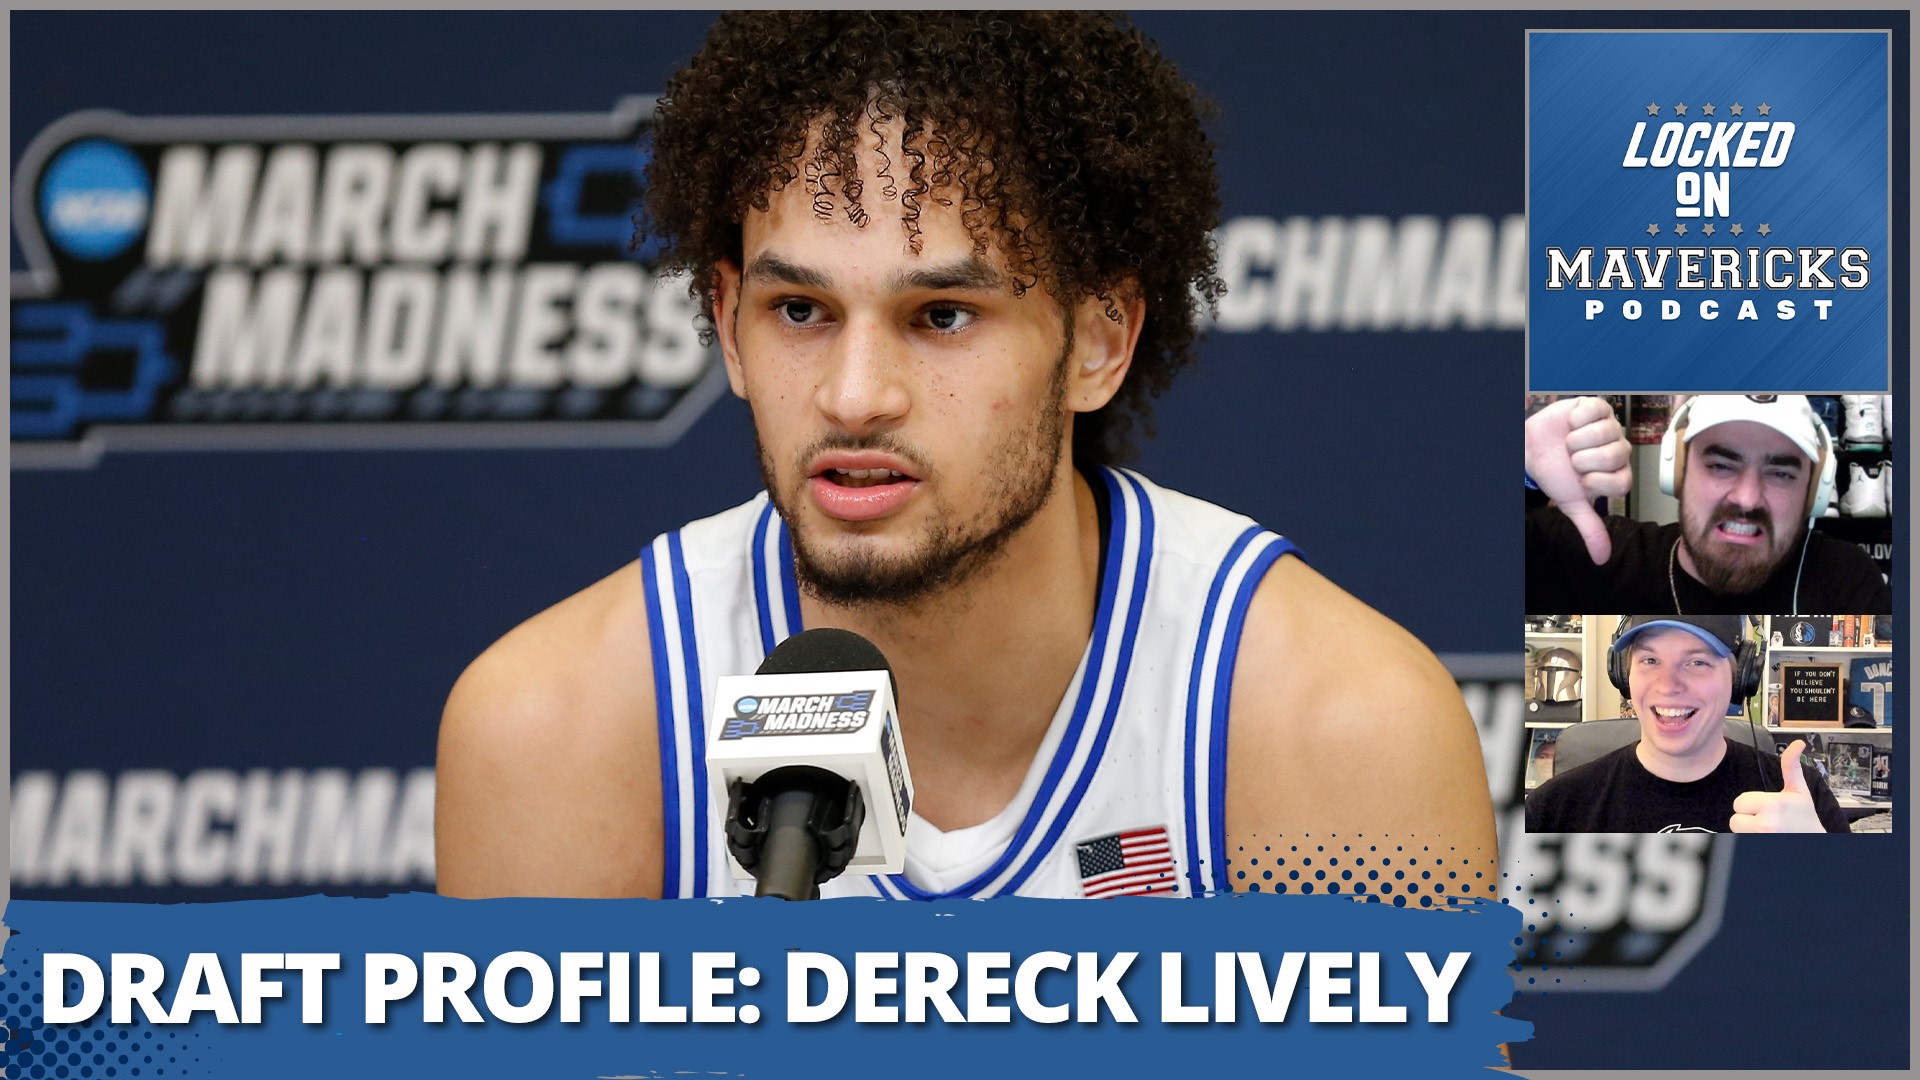 Nick Angstadt & Isaac Harris discuss Dereck Lively and if he could be a good pick for the Dallas Mavericks in the 2023 NBA Draft.